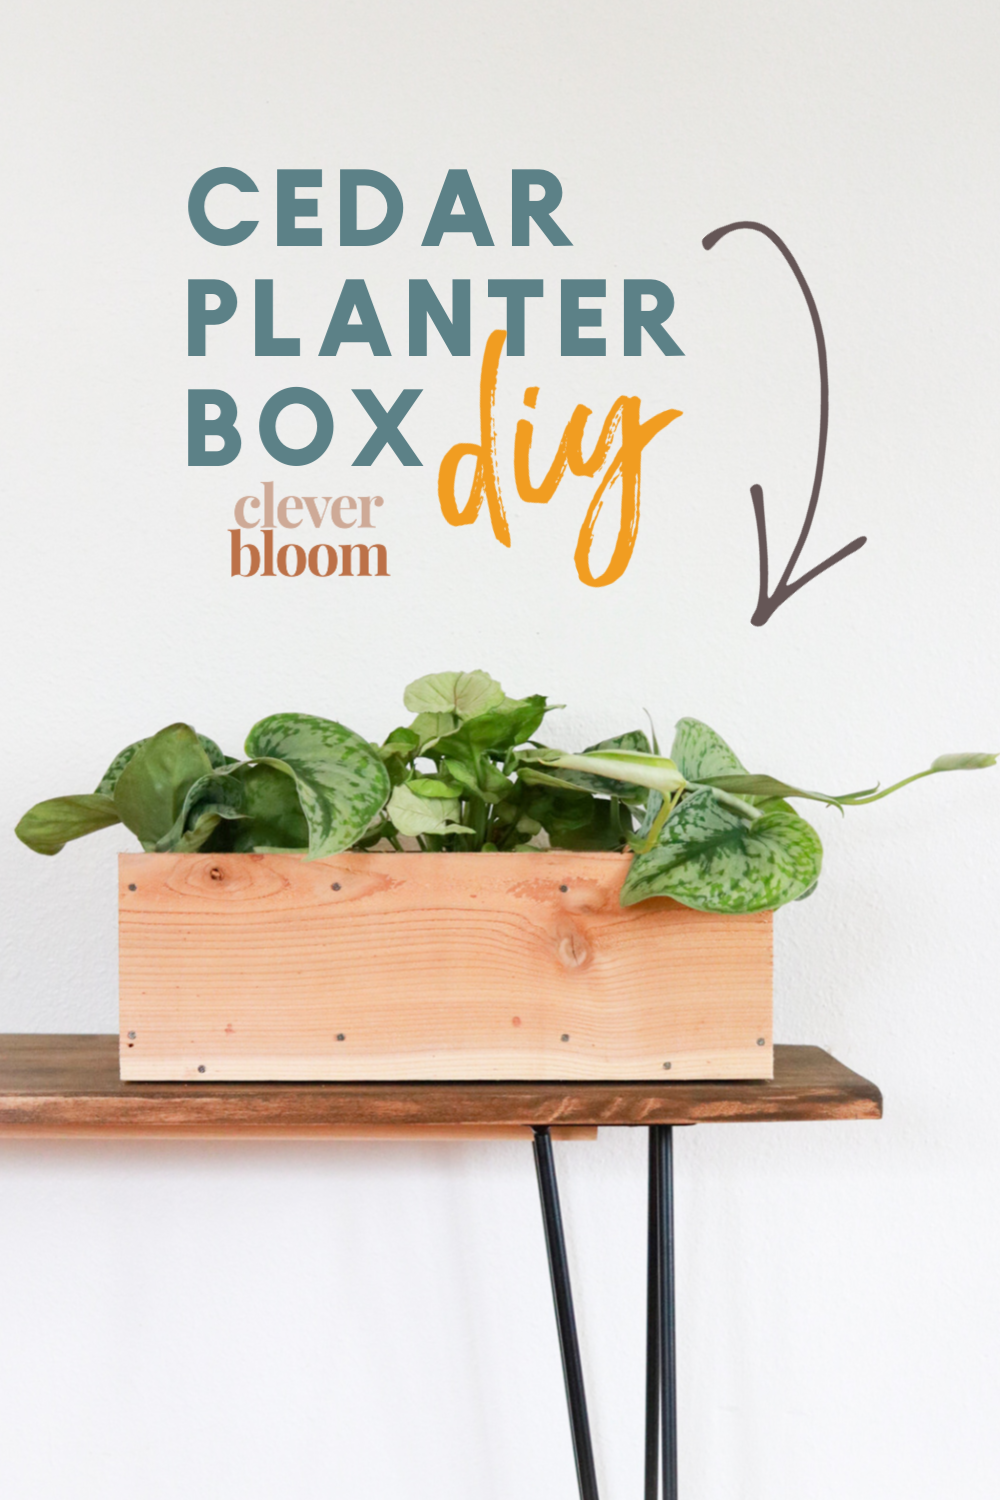 This easy weekend DIY can be made with just ONE cedar fence board. Make this Cedar Planter Box for your indoor or outdoor garden. Clever Bloom #houseplants #woodenplanter